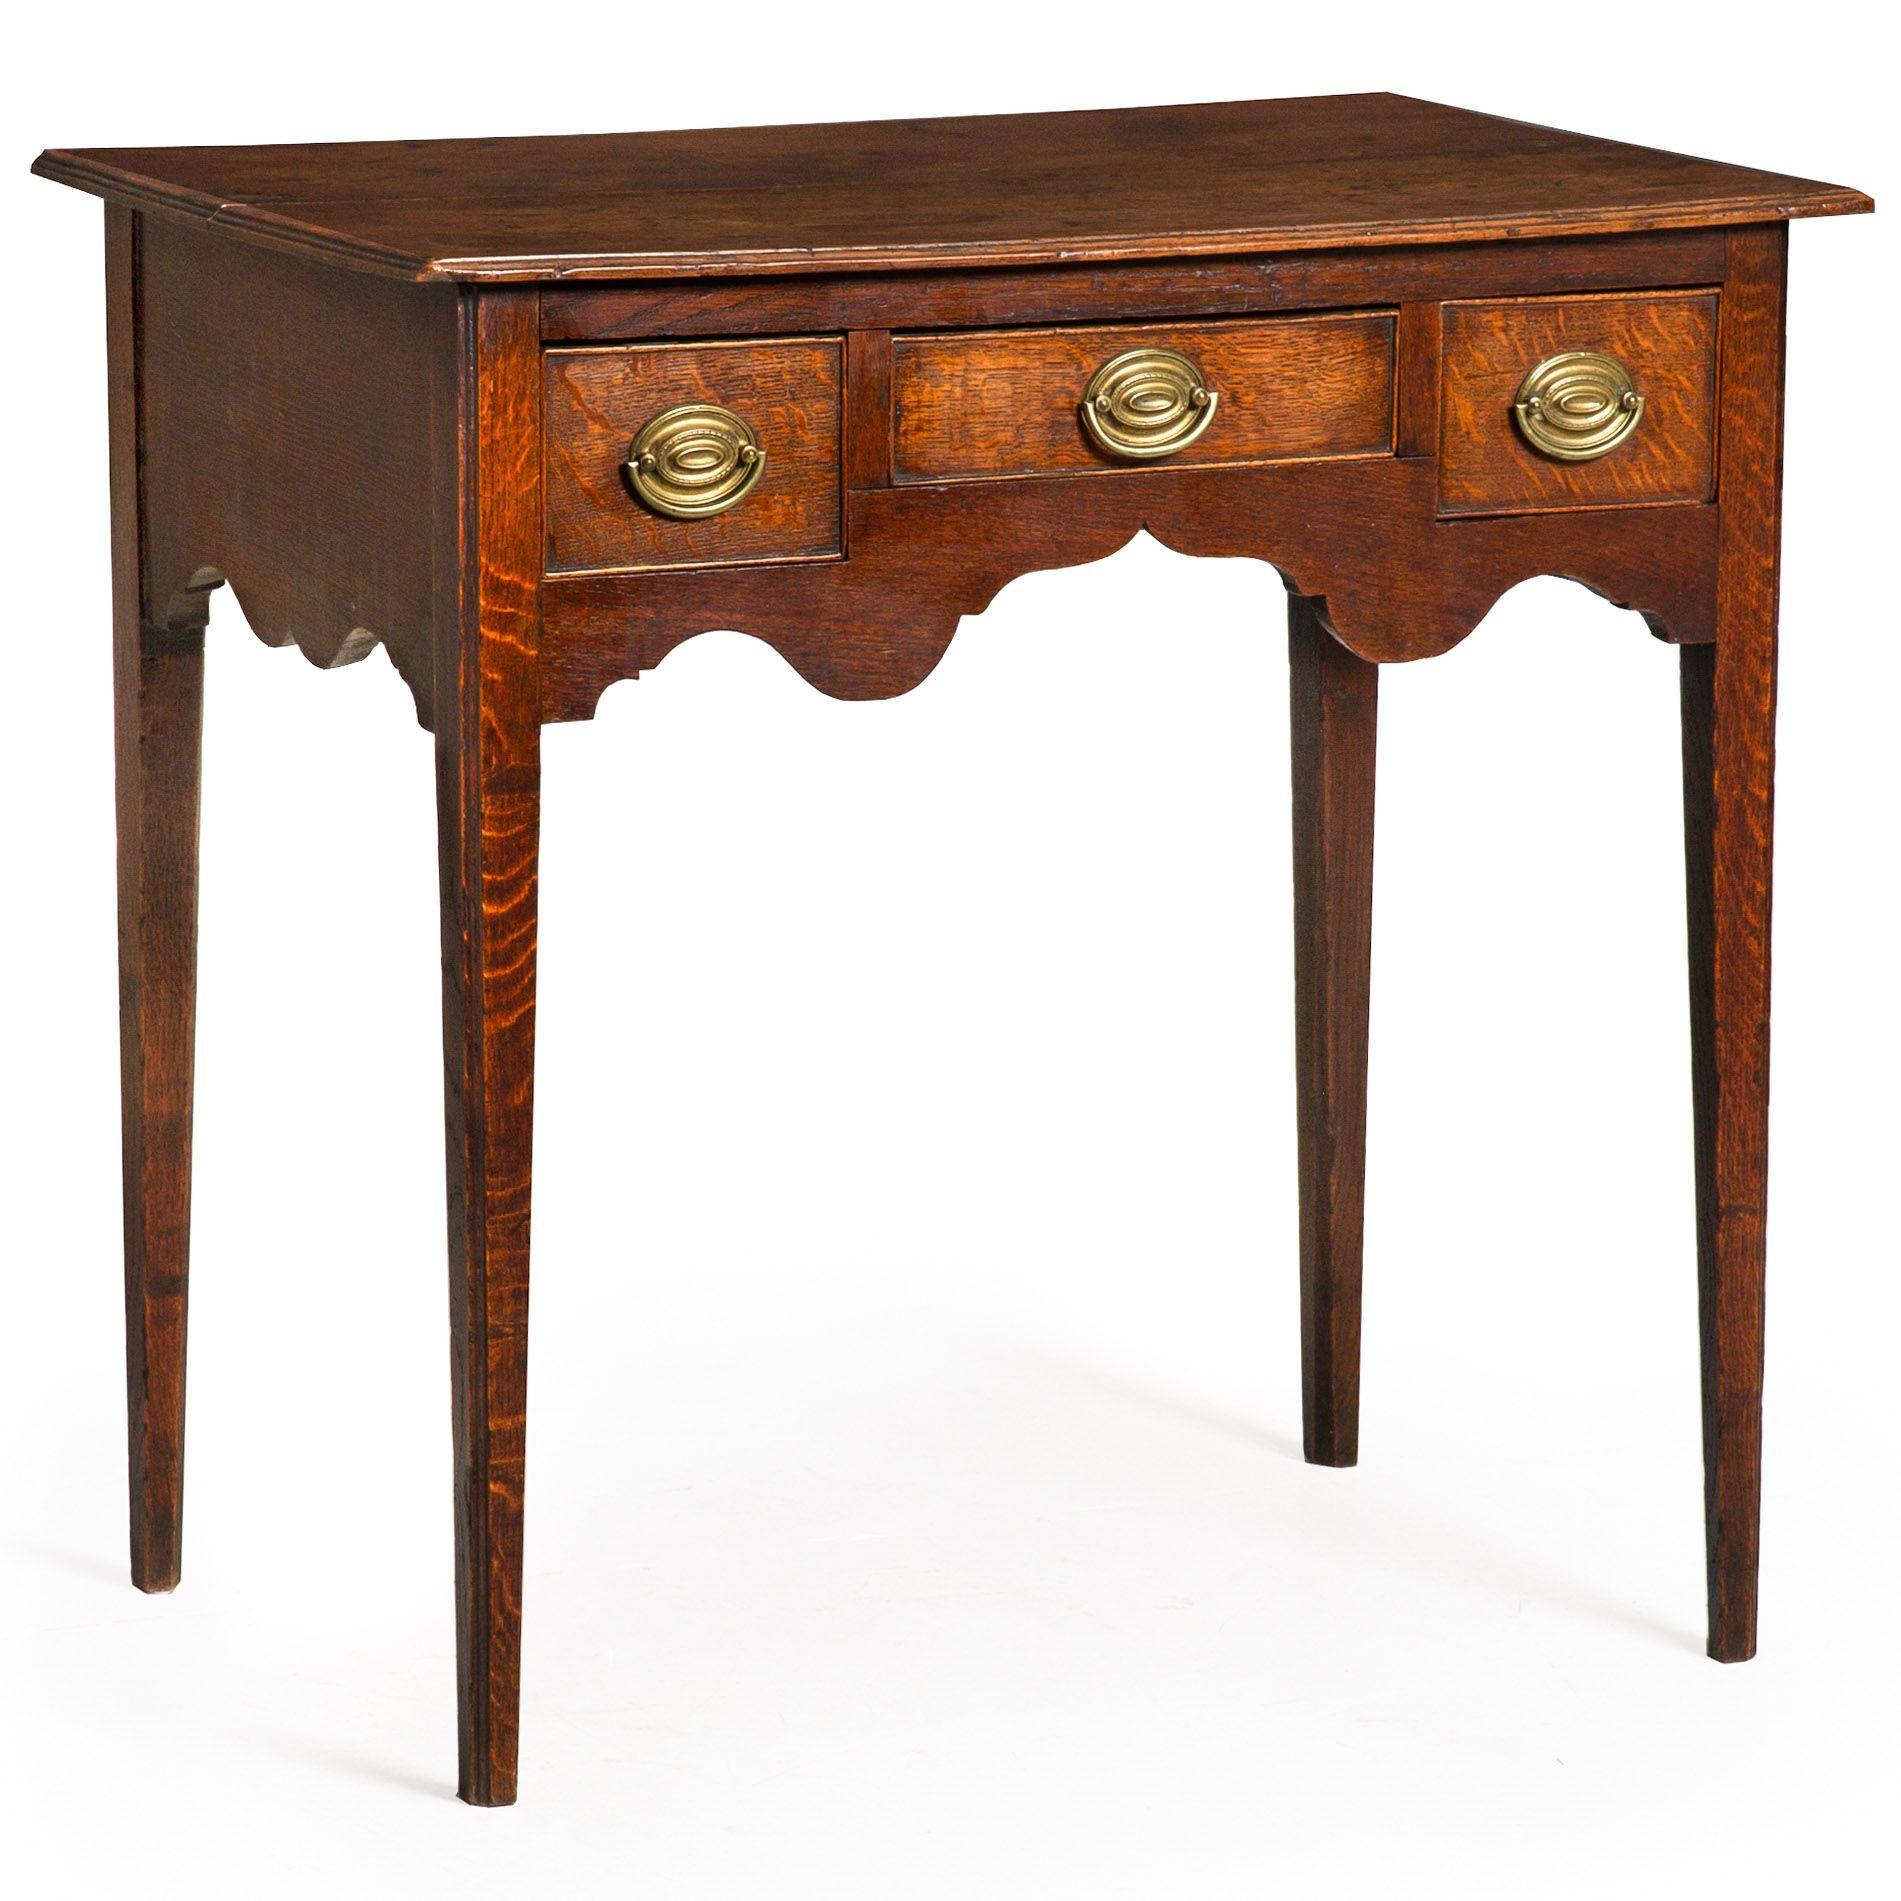 GEORGE III PROVINCIAL PATINATED OAK THREE-DRAWER WRITING TABLE
England, circa 1780  with scrolled cupid's bow apron
Item # 312EKH07Q

A beautifully patinated writing table from the George III period, this intelligently conceived and finely